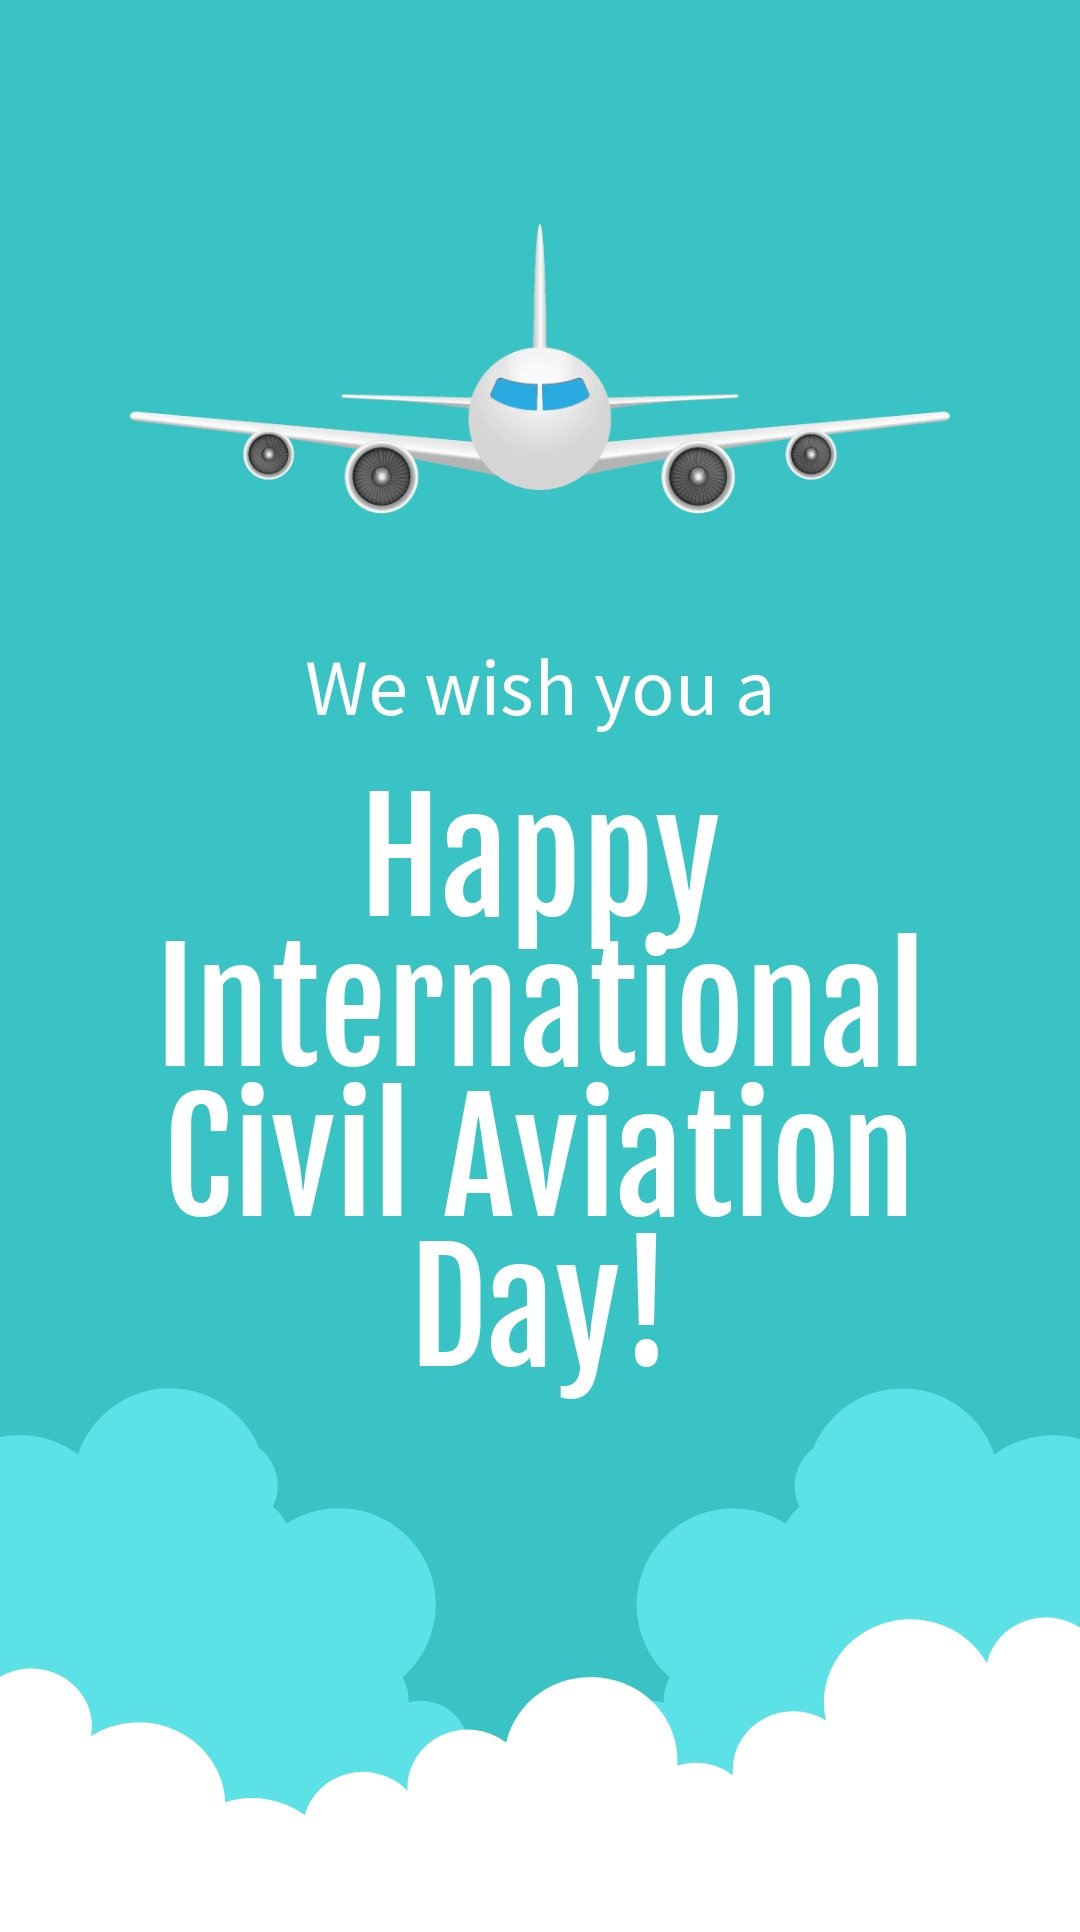 FREE Civil Aviation Day Templates & Examples - Edit Online & Download ...